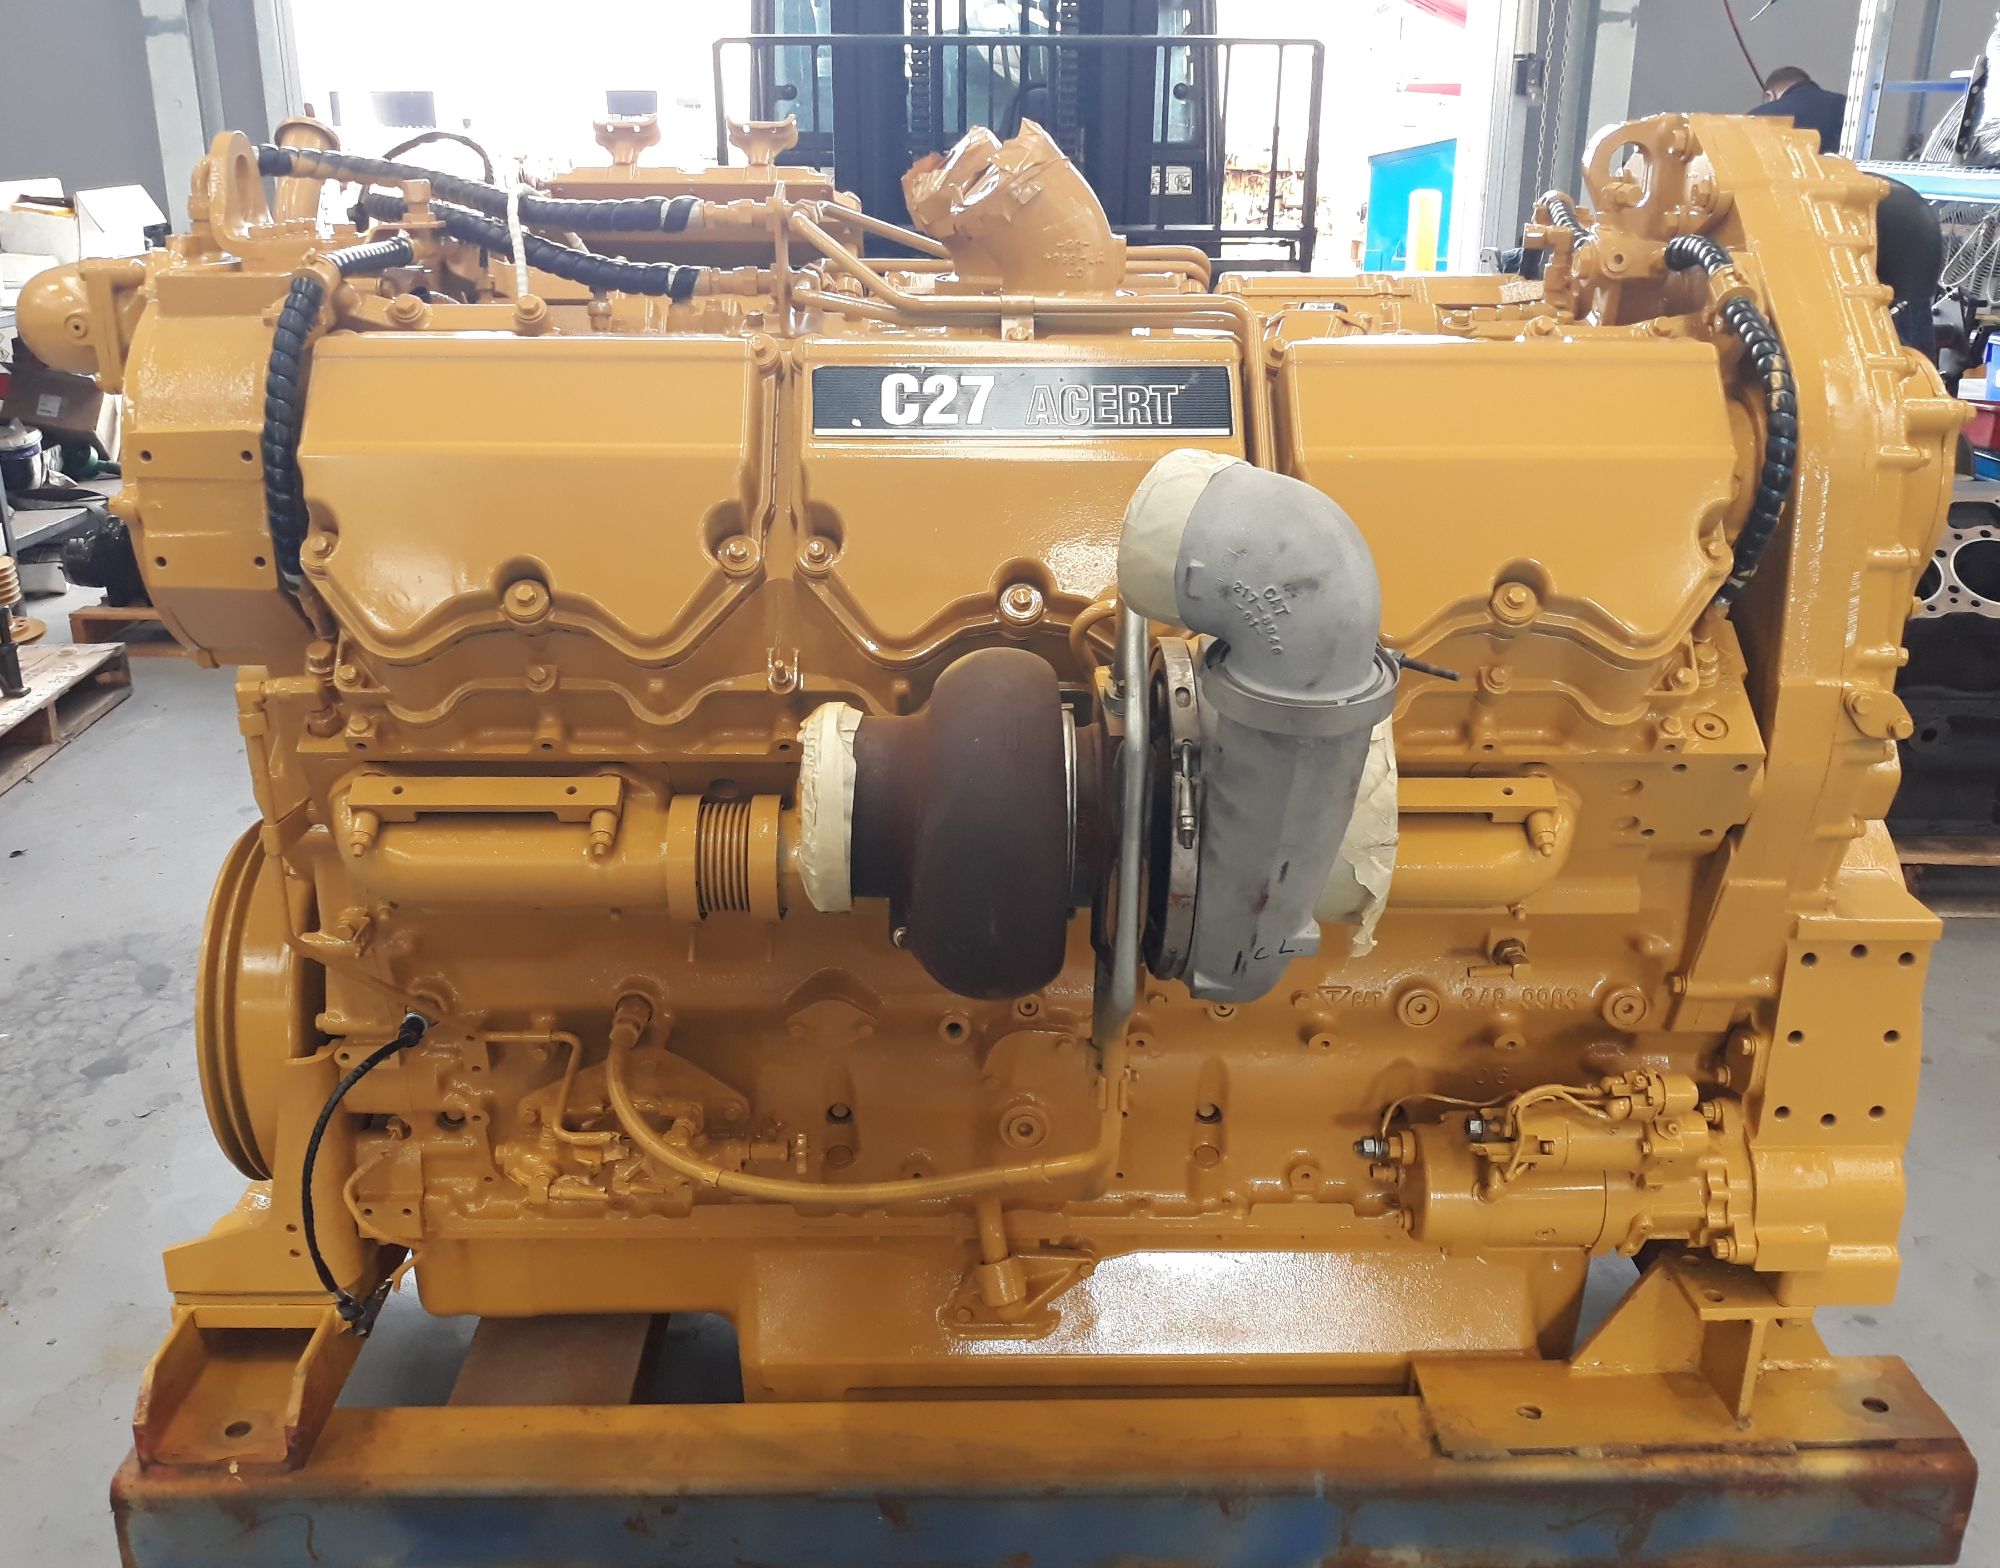 CaterpillarÂ® C27 Remanufactured Engines for sale throughout Australia